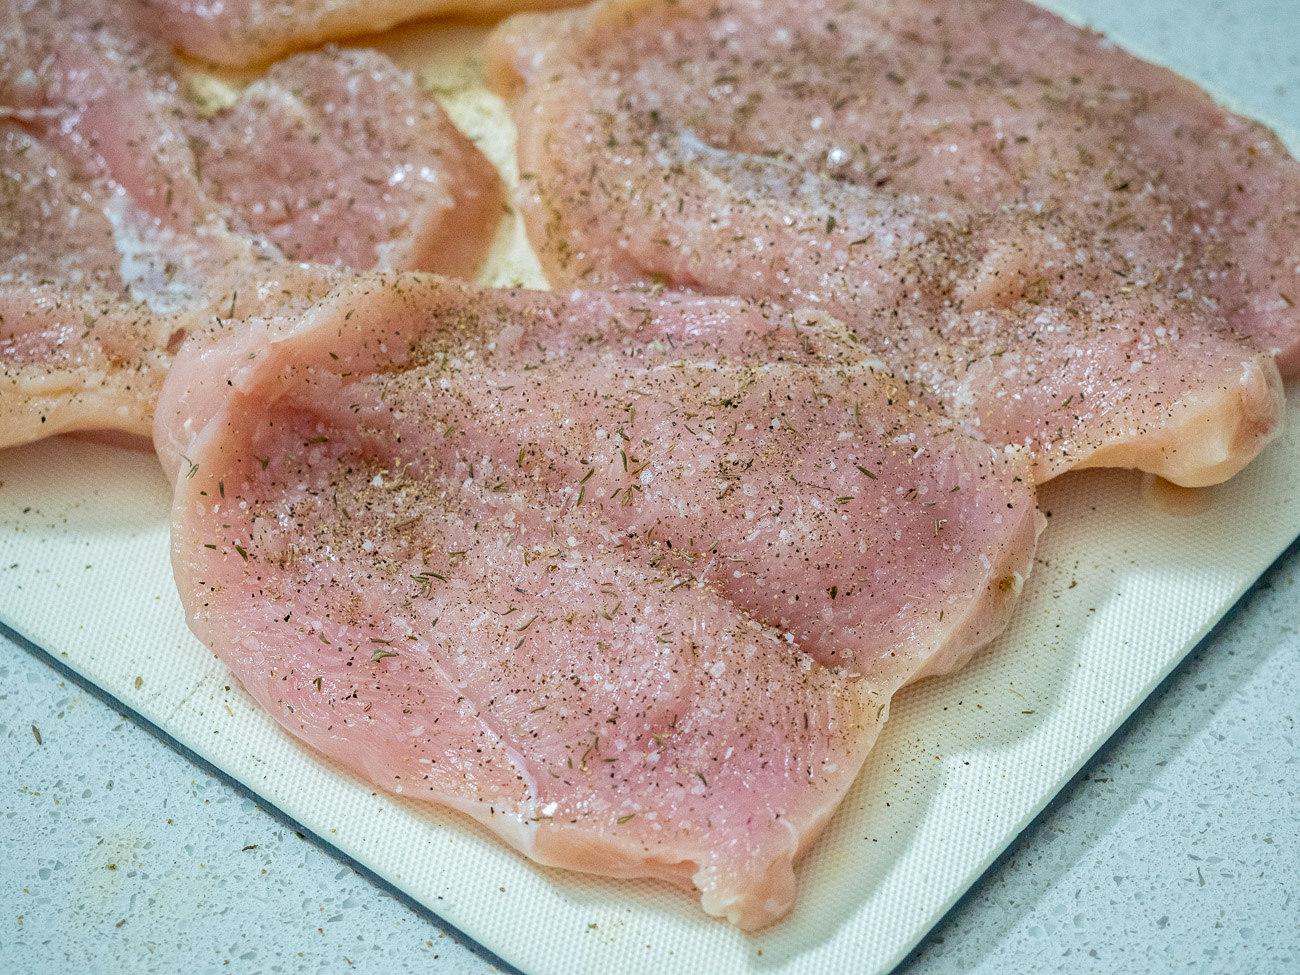 Butterfly the chicken breasts by cutting them horizontally so that they open up like a book and are attached on one side.